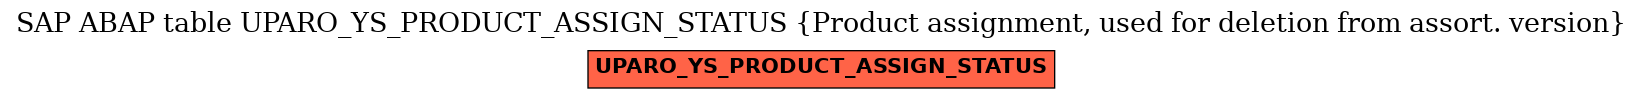 E-R Diagram for table UPARO_YS_PRODUCT_ASSIGN_STATUS (Product assignment, used for deletion from assort. version)